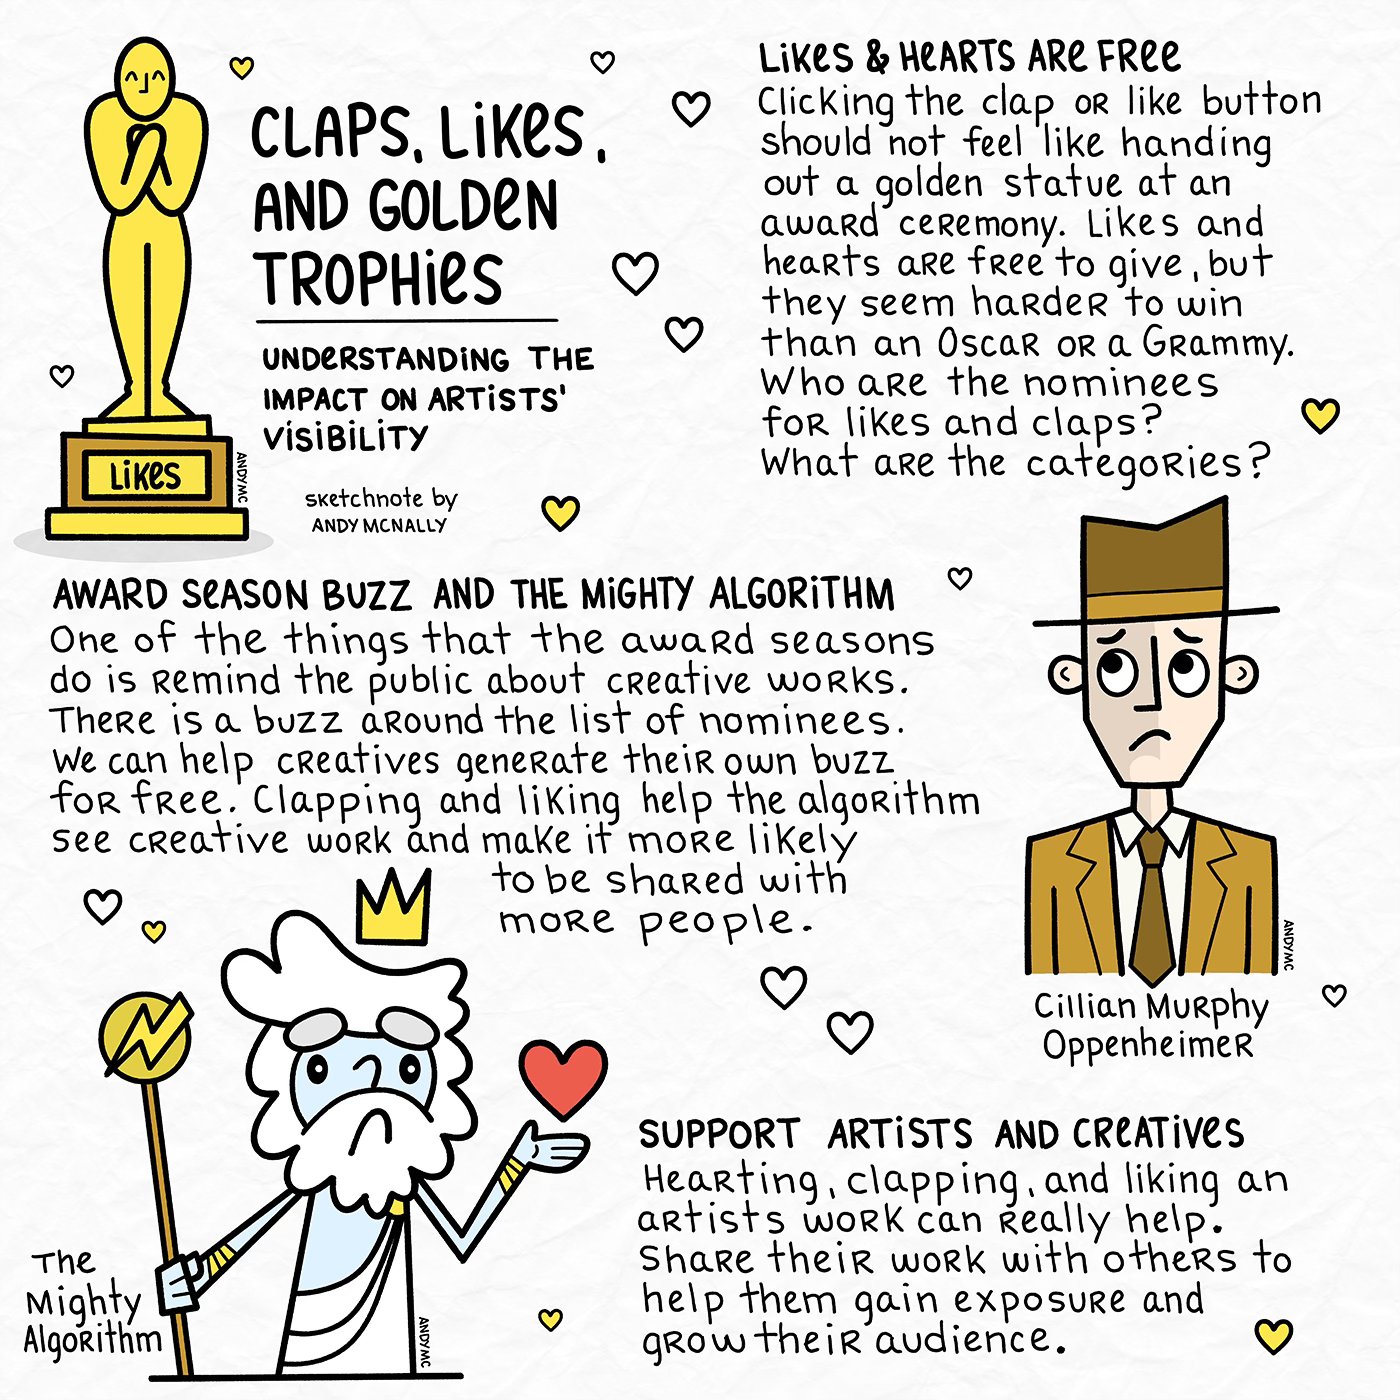 a sketchnote about the impact claps and likes have for artists